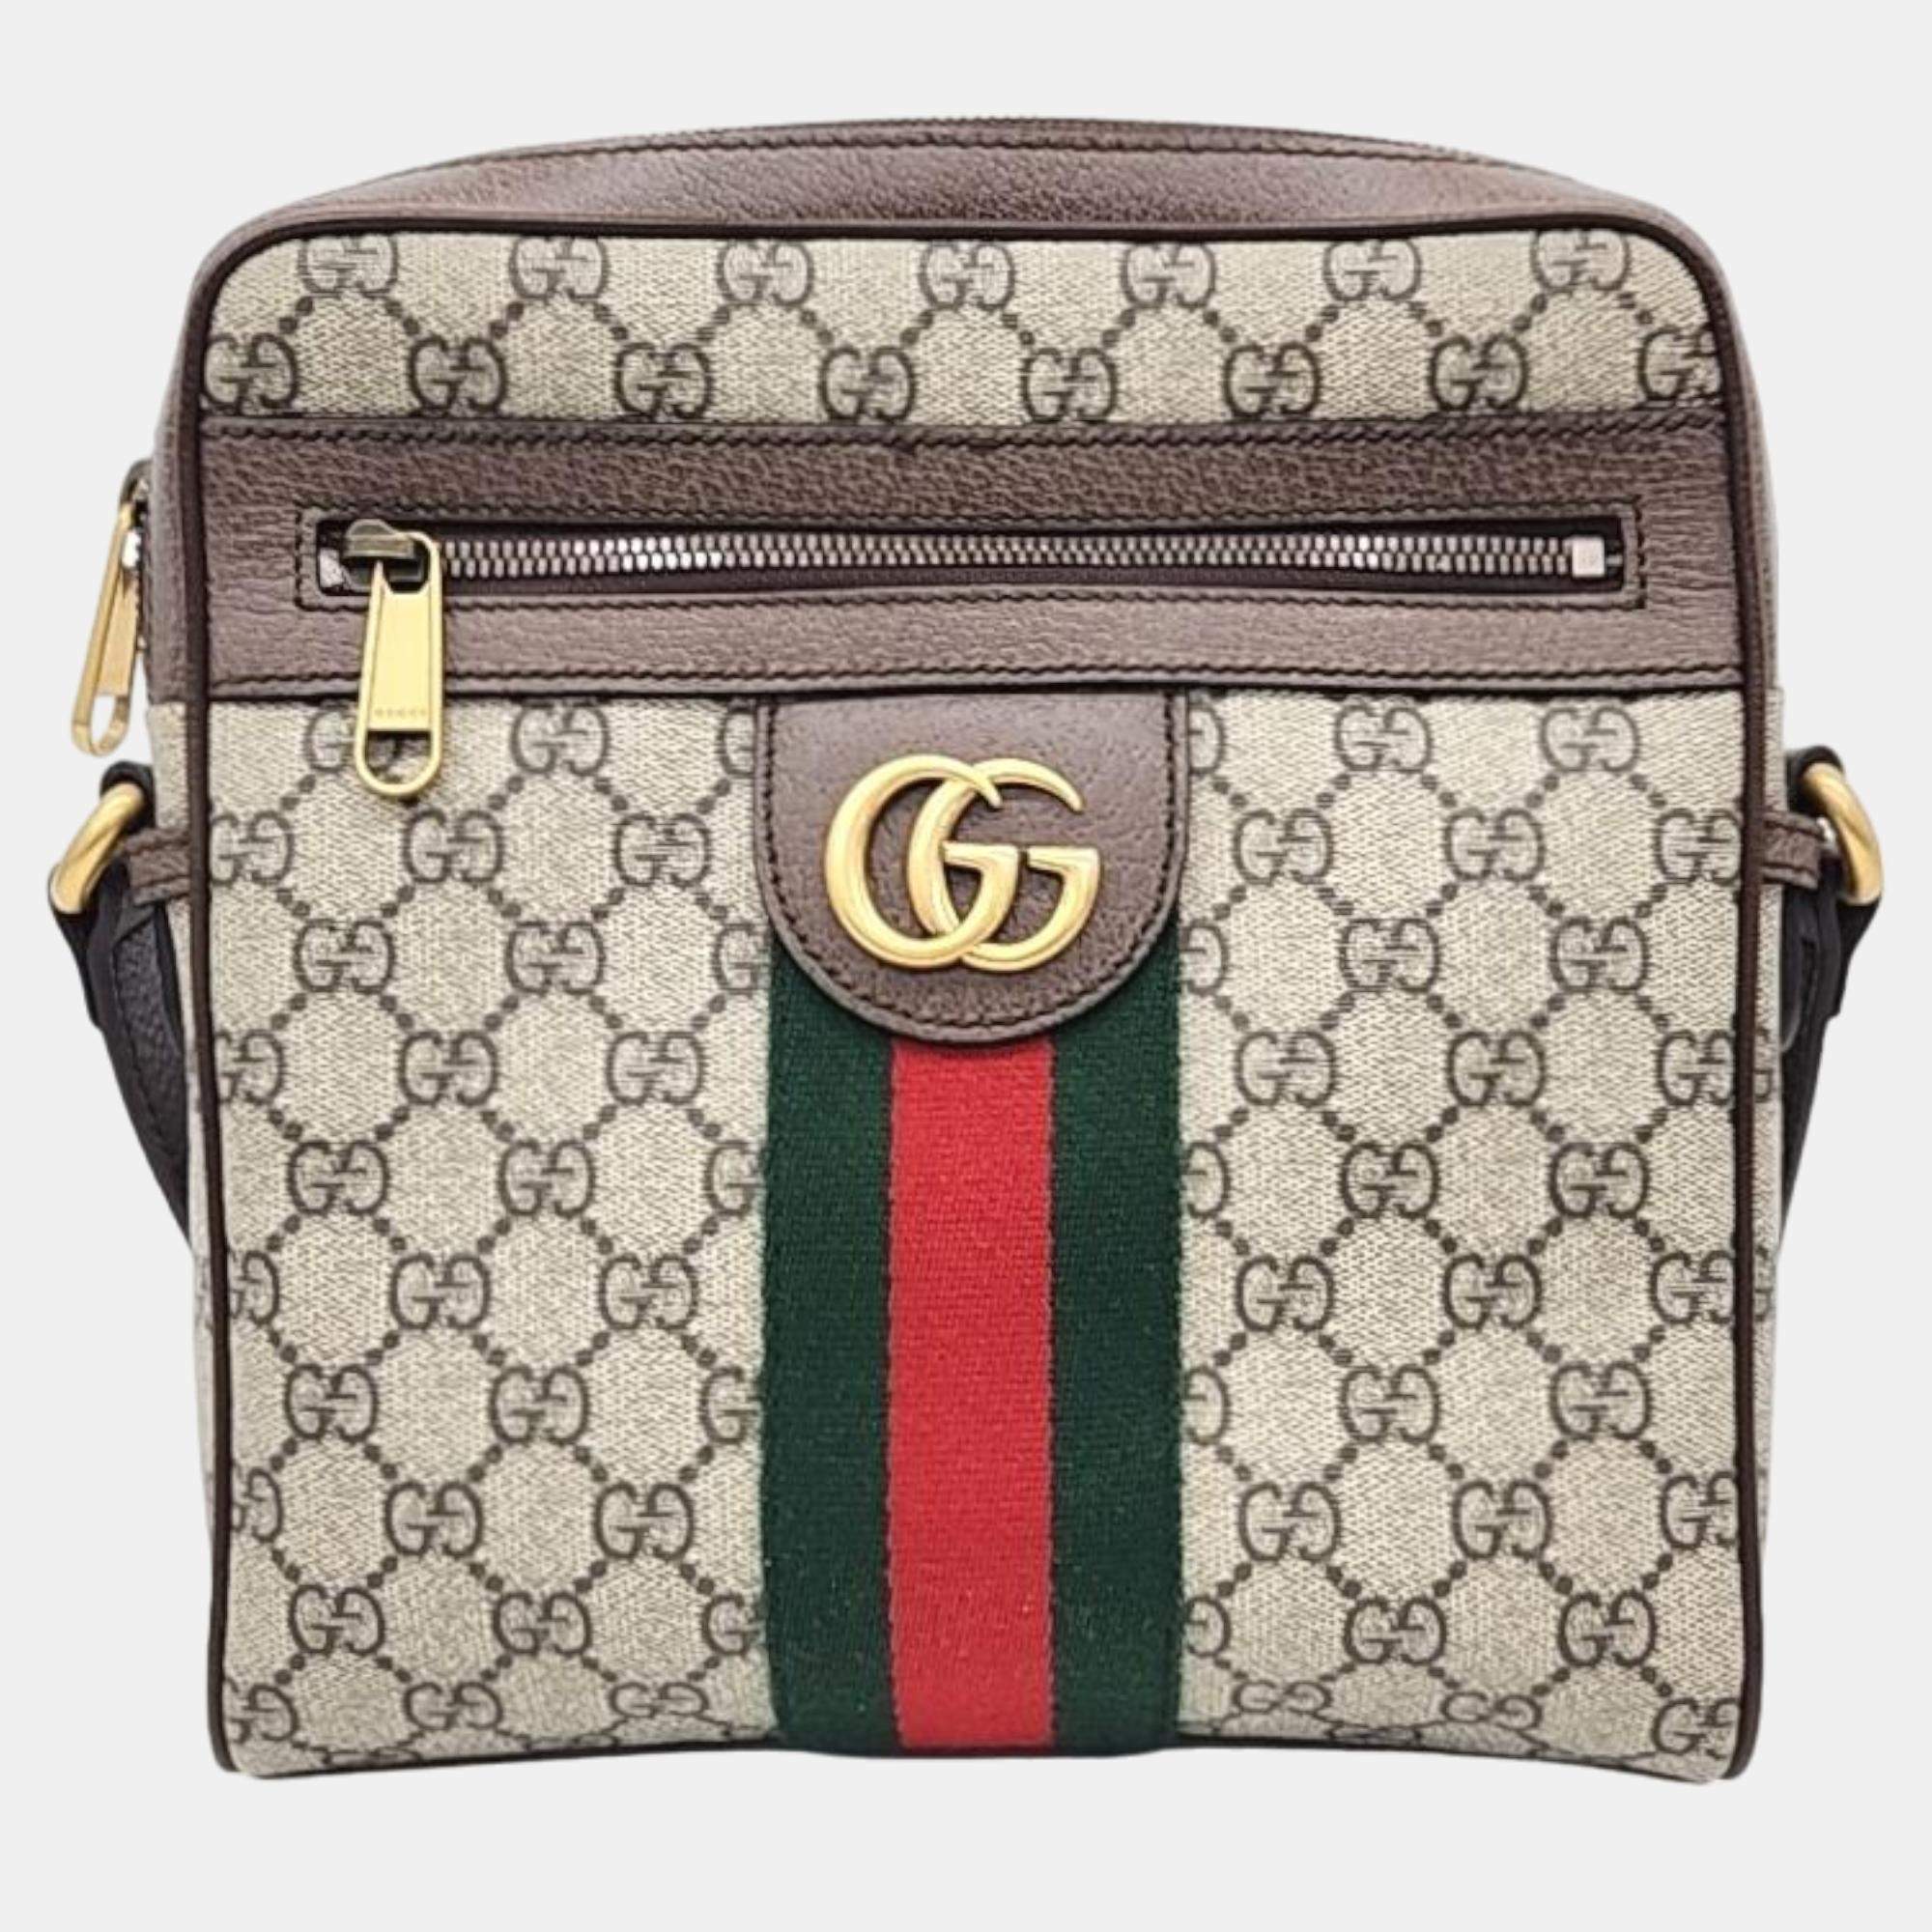 Gucci GG Canvas Ophidia Small Messenger Bag